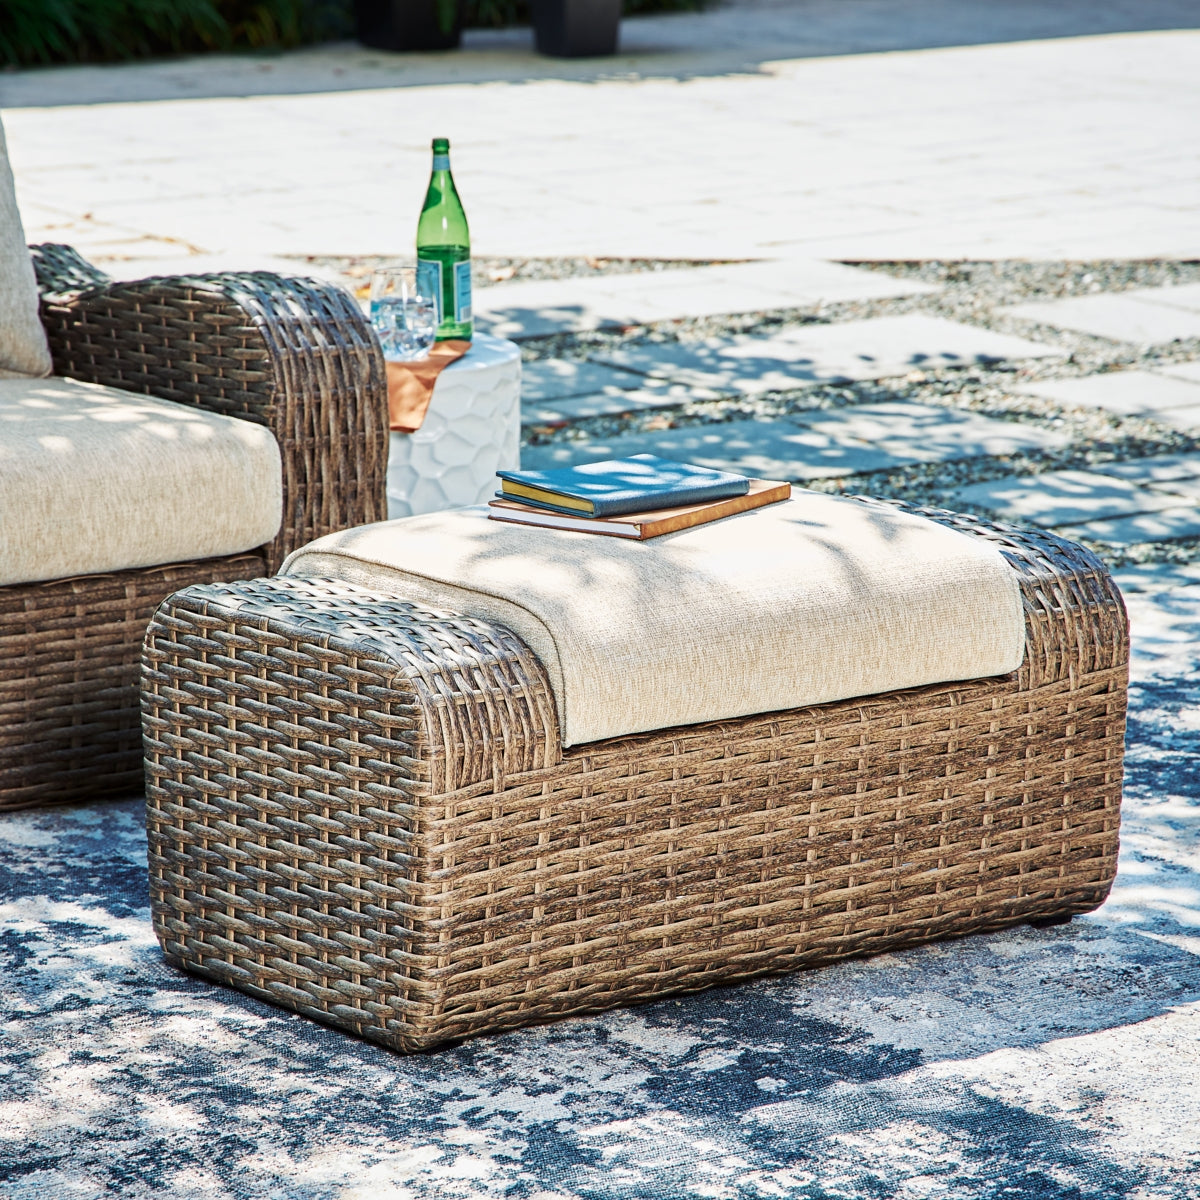 Sandy Bloom Outdoor Sofa and Loveseat with Lounge Chair and Ottoman - furniture place usa